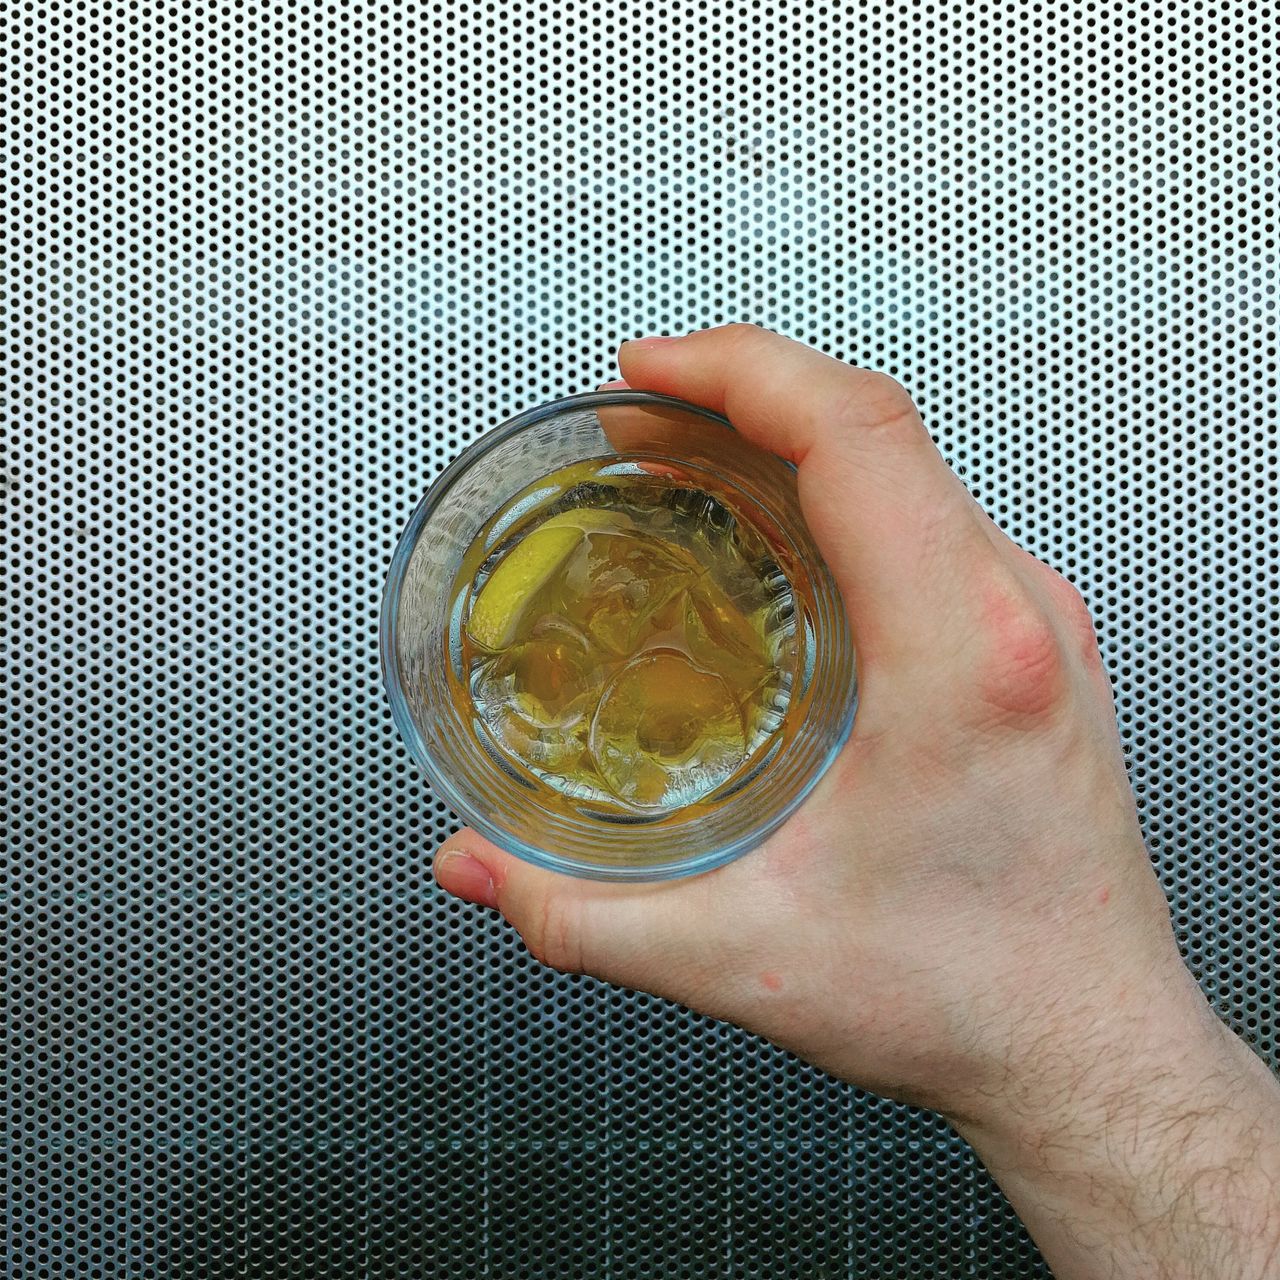 CLOSE-UP OF HAND HOLDING DRINK